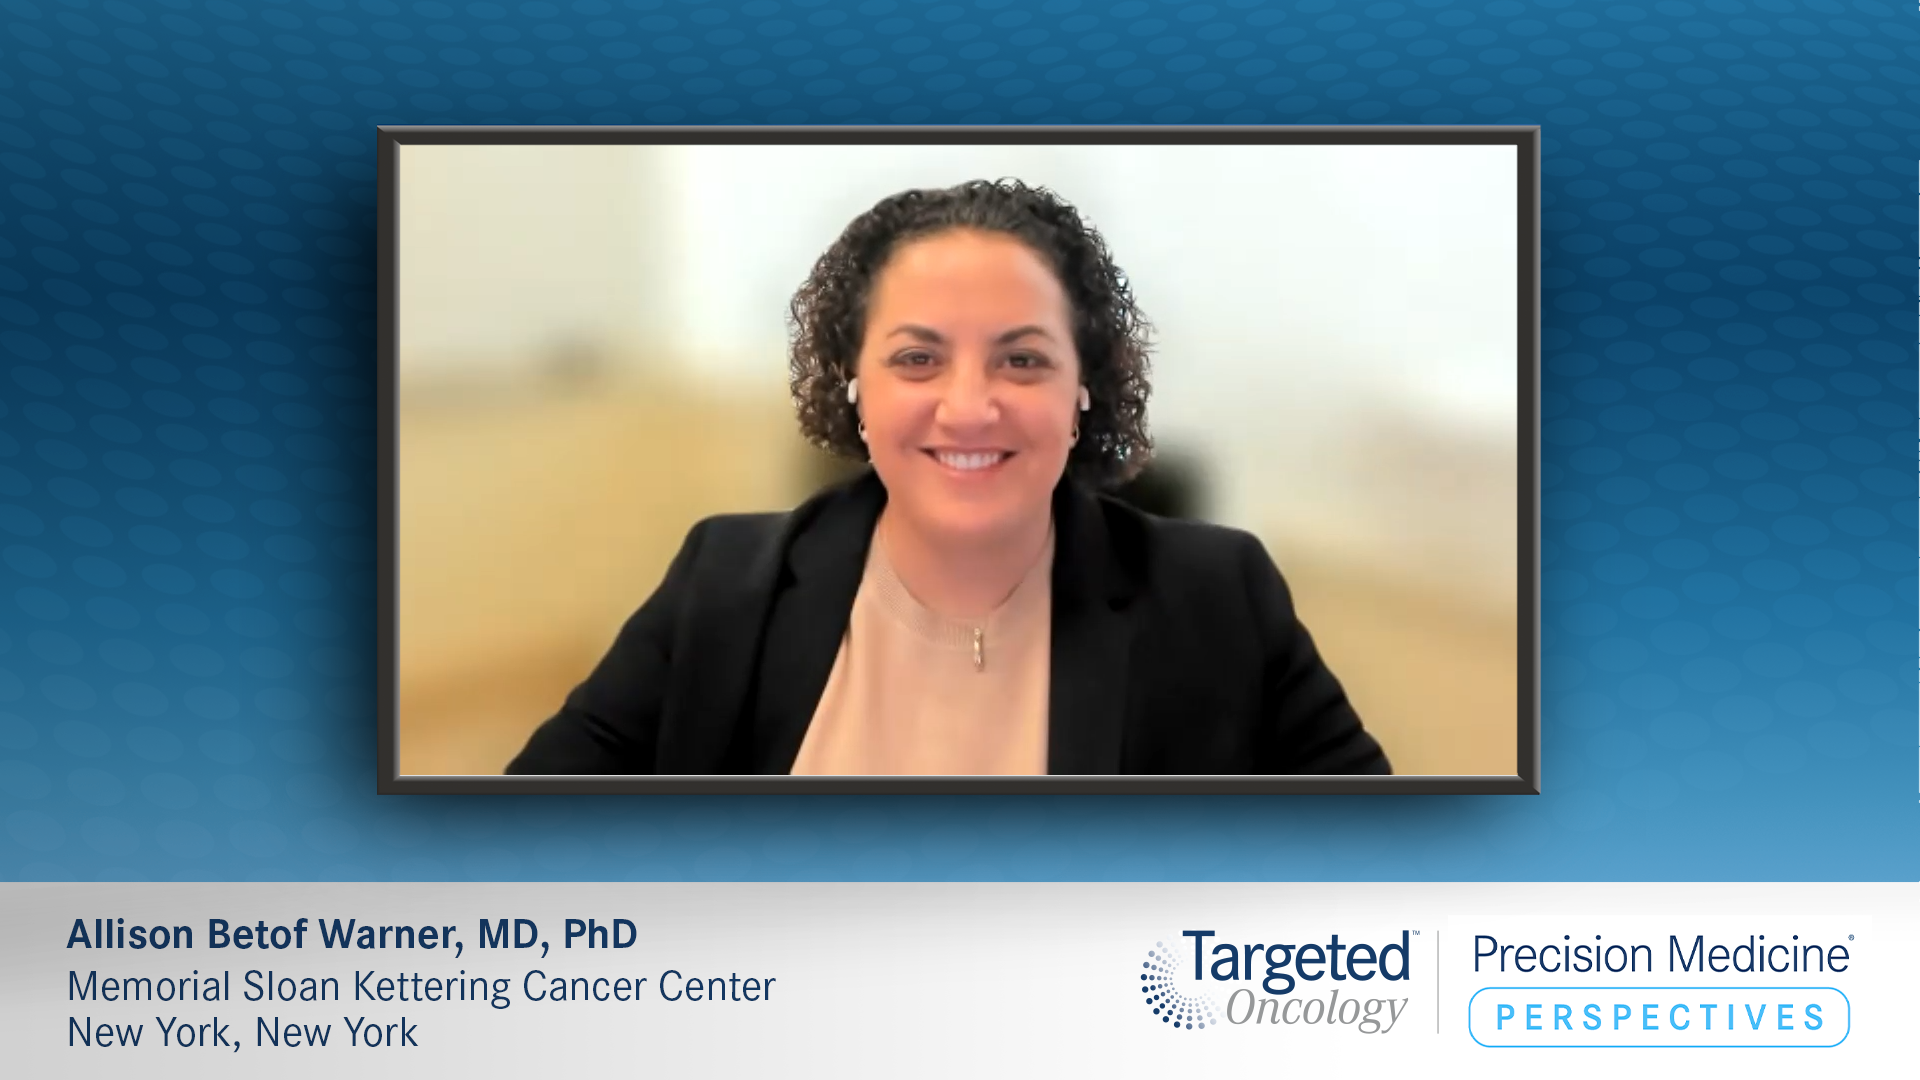 Expert in oncology